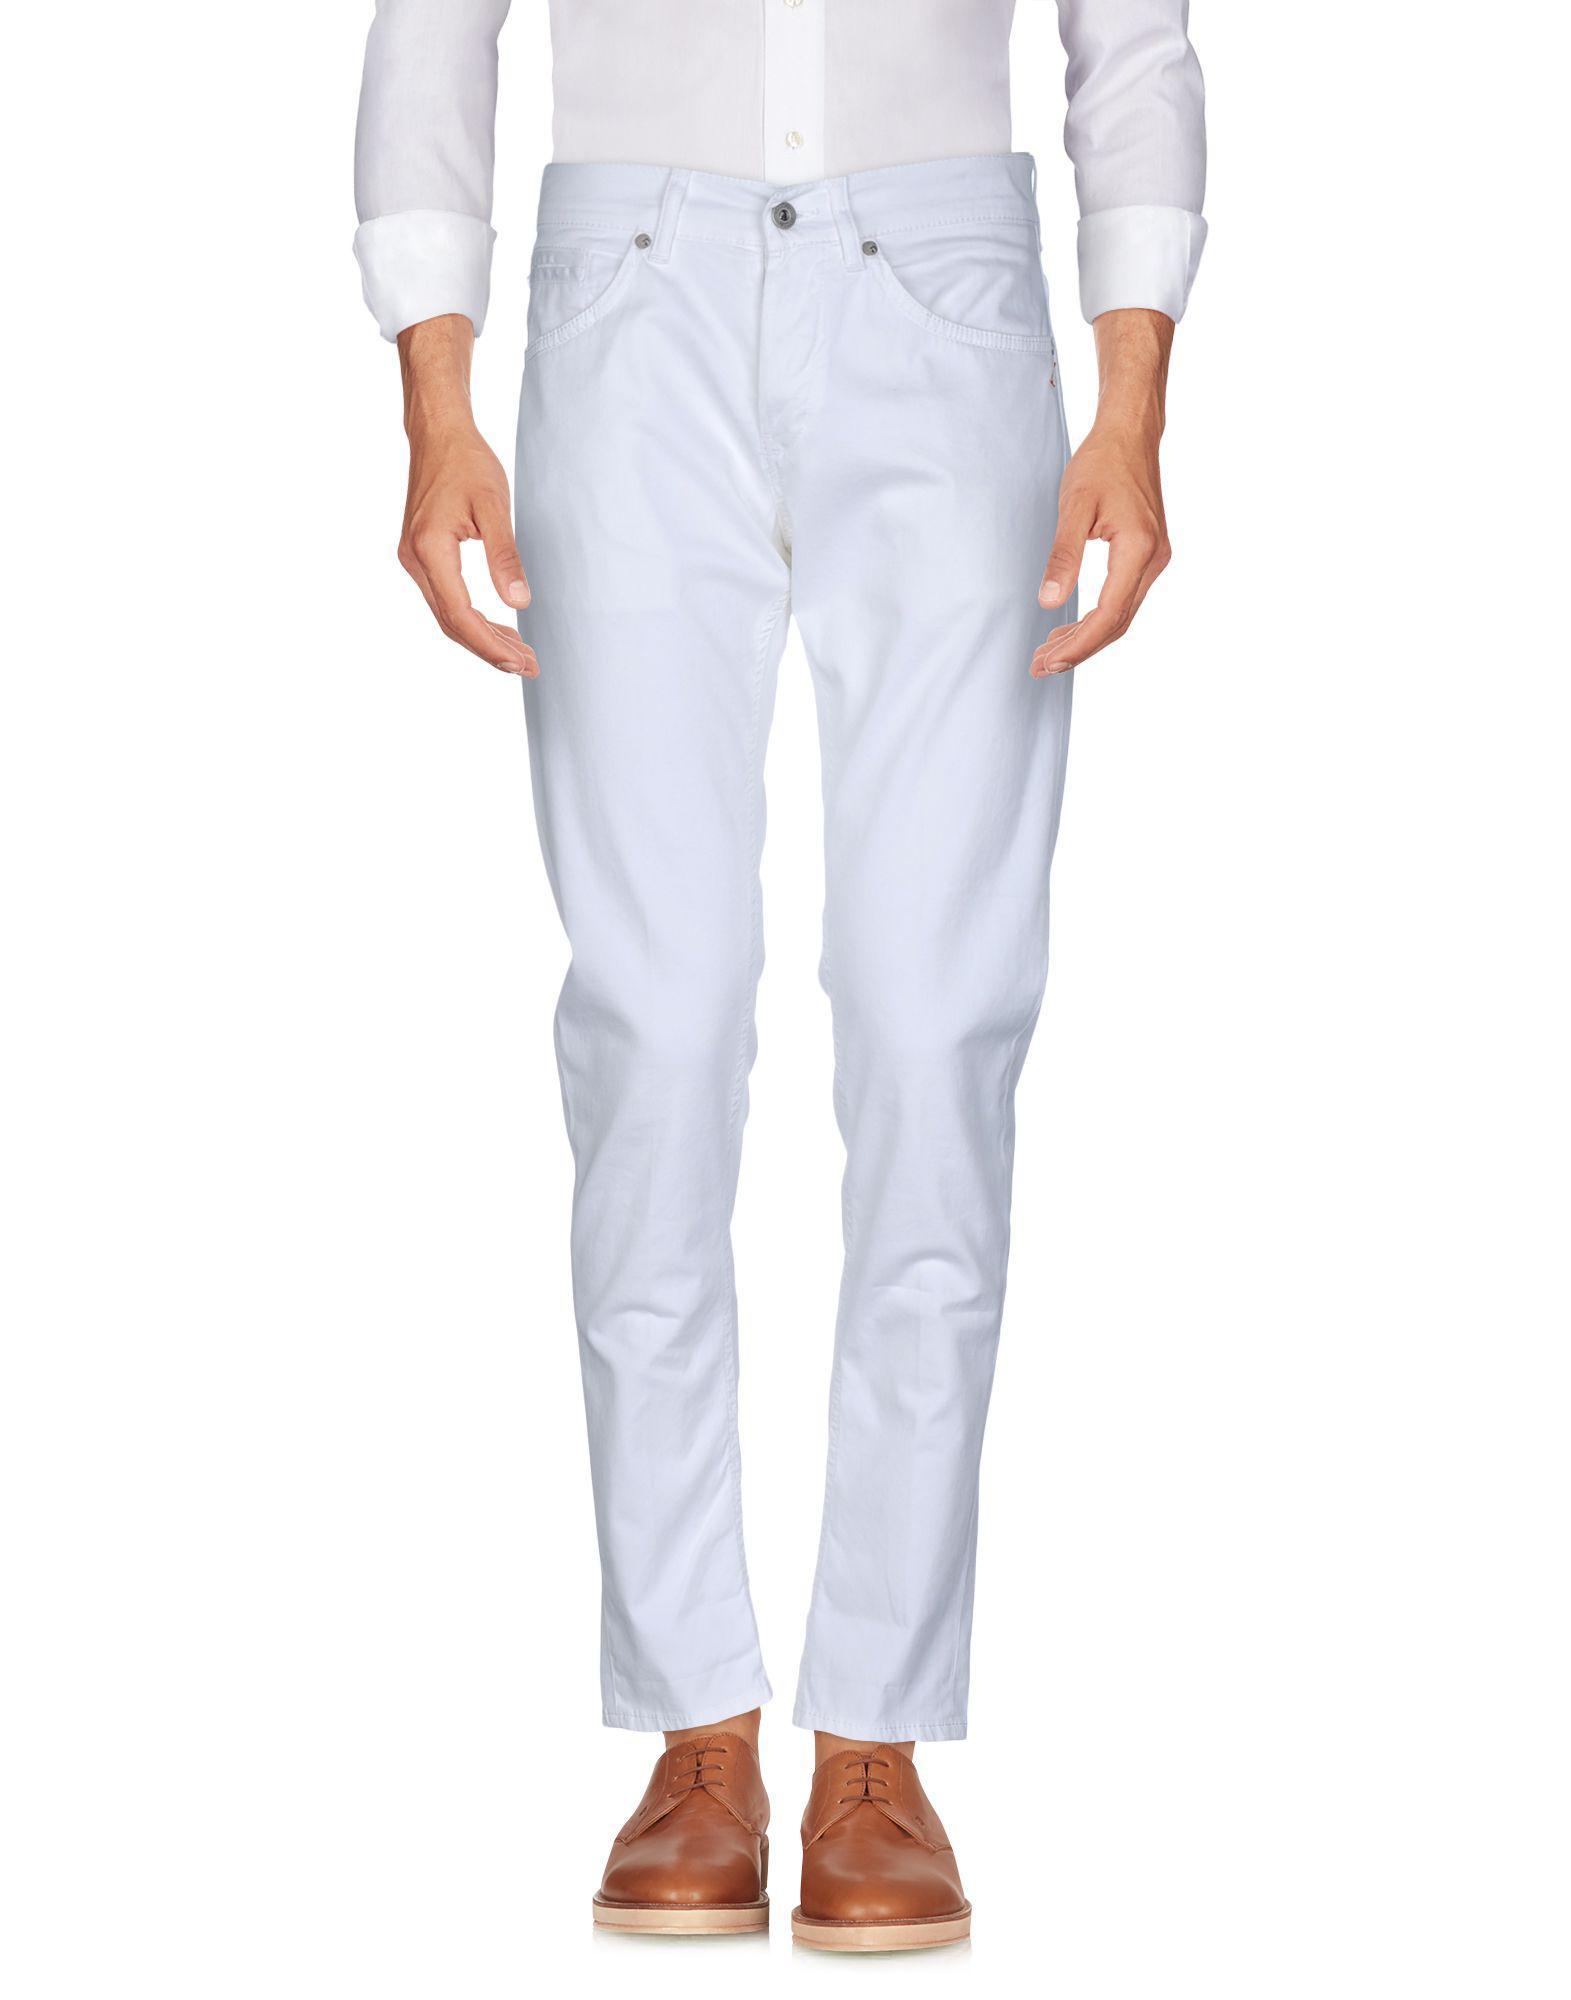 Dondup Cotton Casual Trouser in White for Men - Lyst